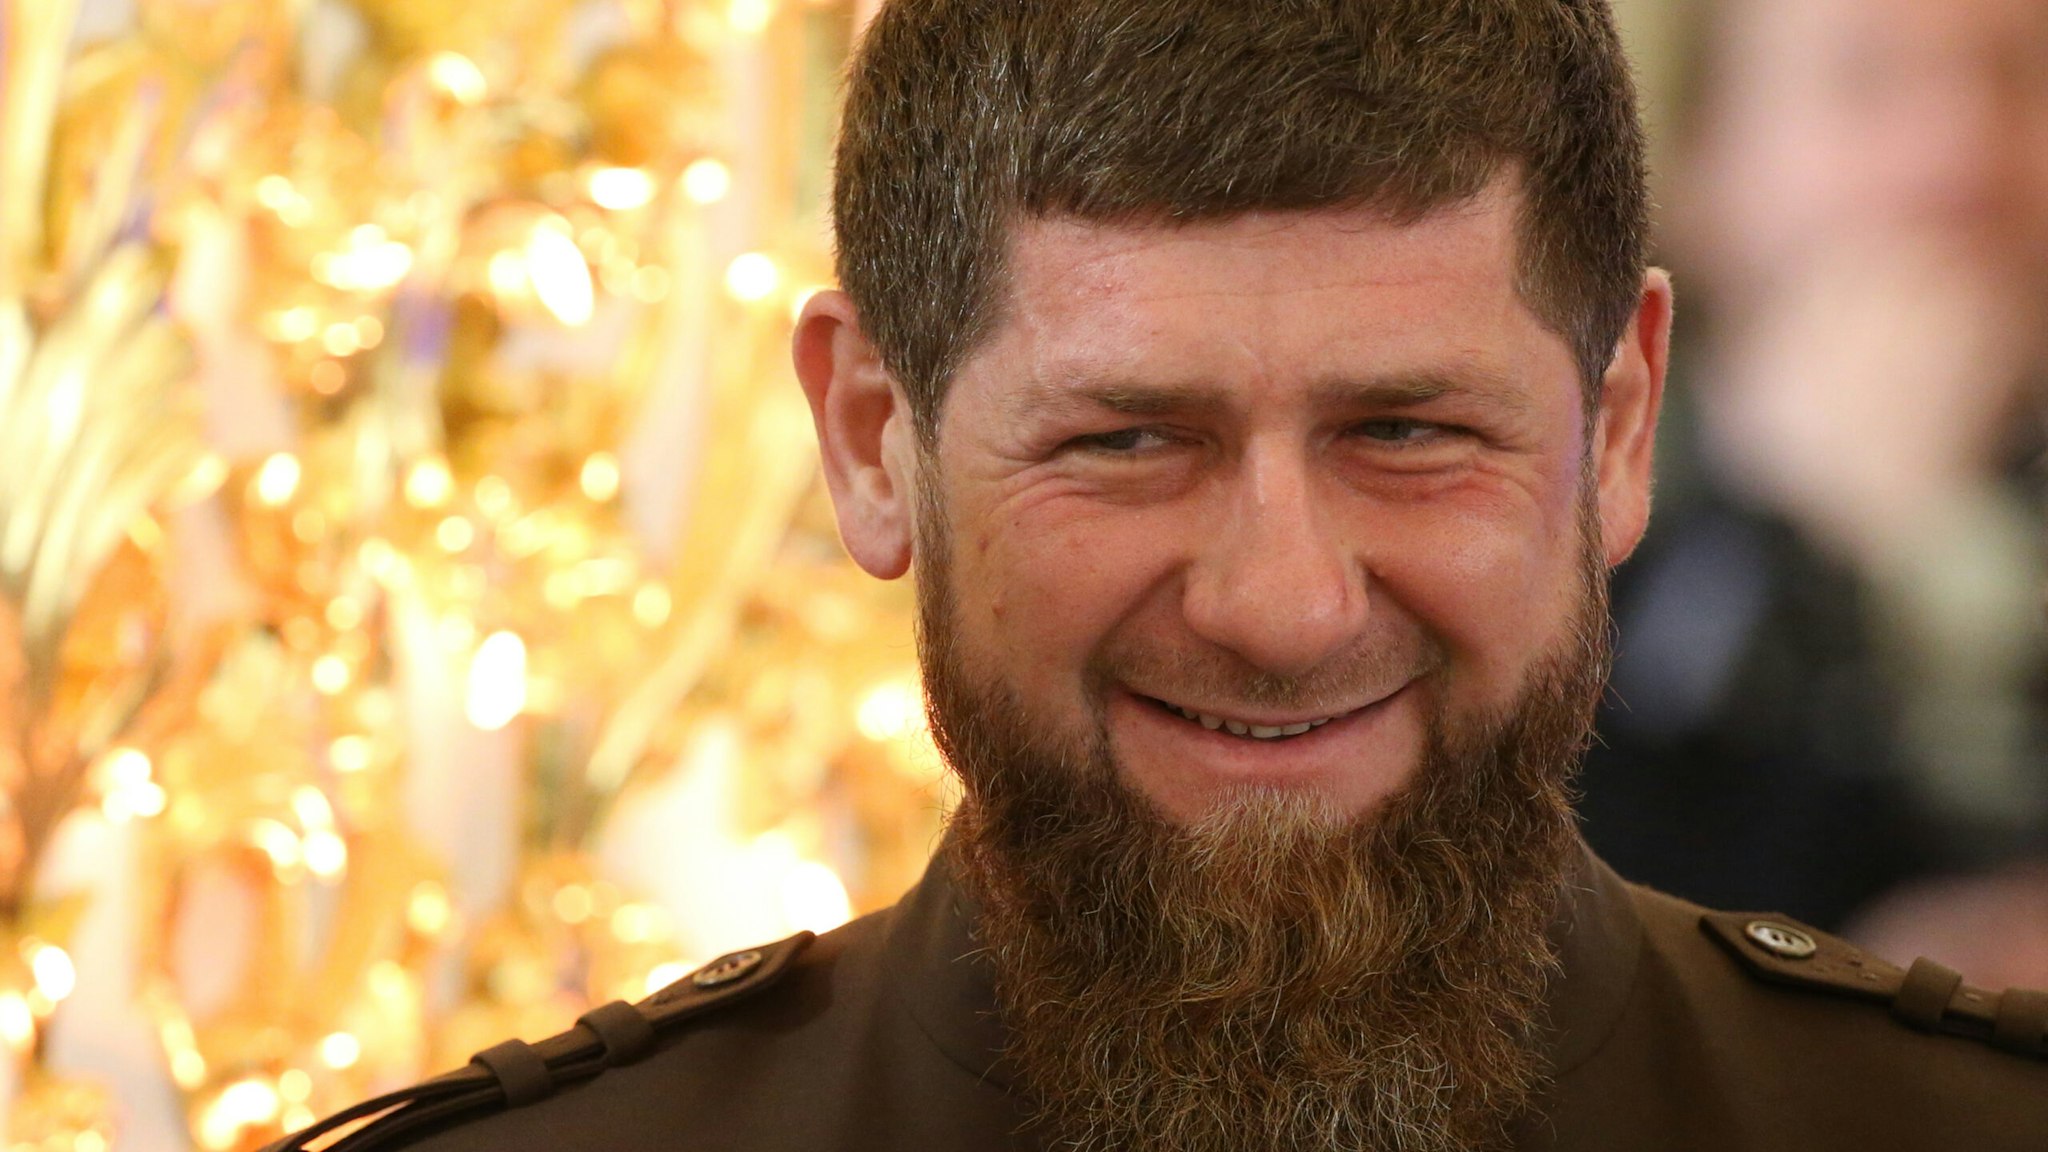 Chechen leader Ramzan Kadyrov insists Vladimir Putin is not in a coma, but who said he was?